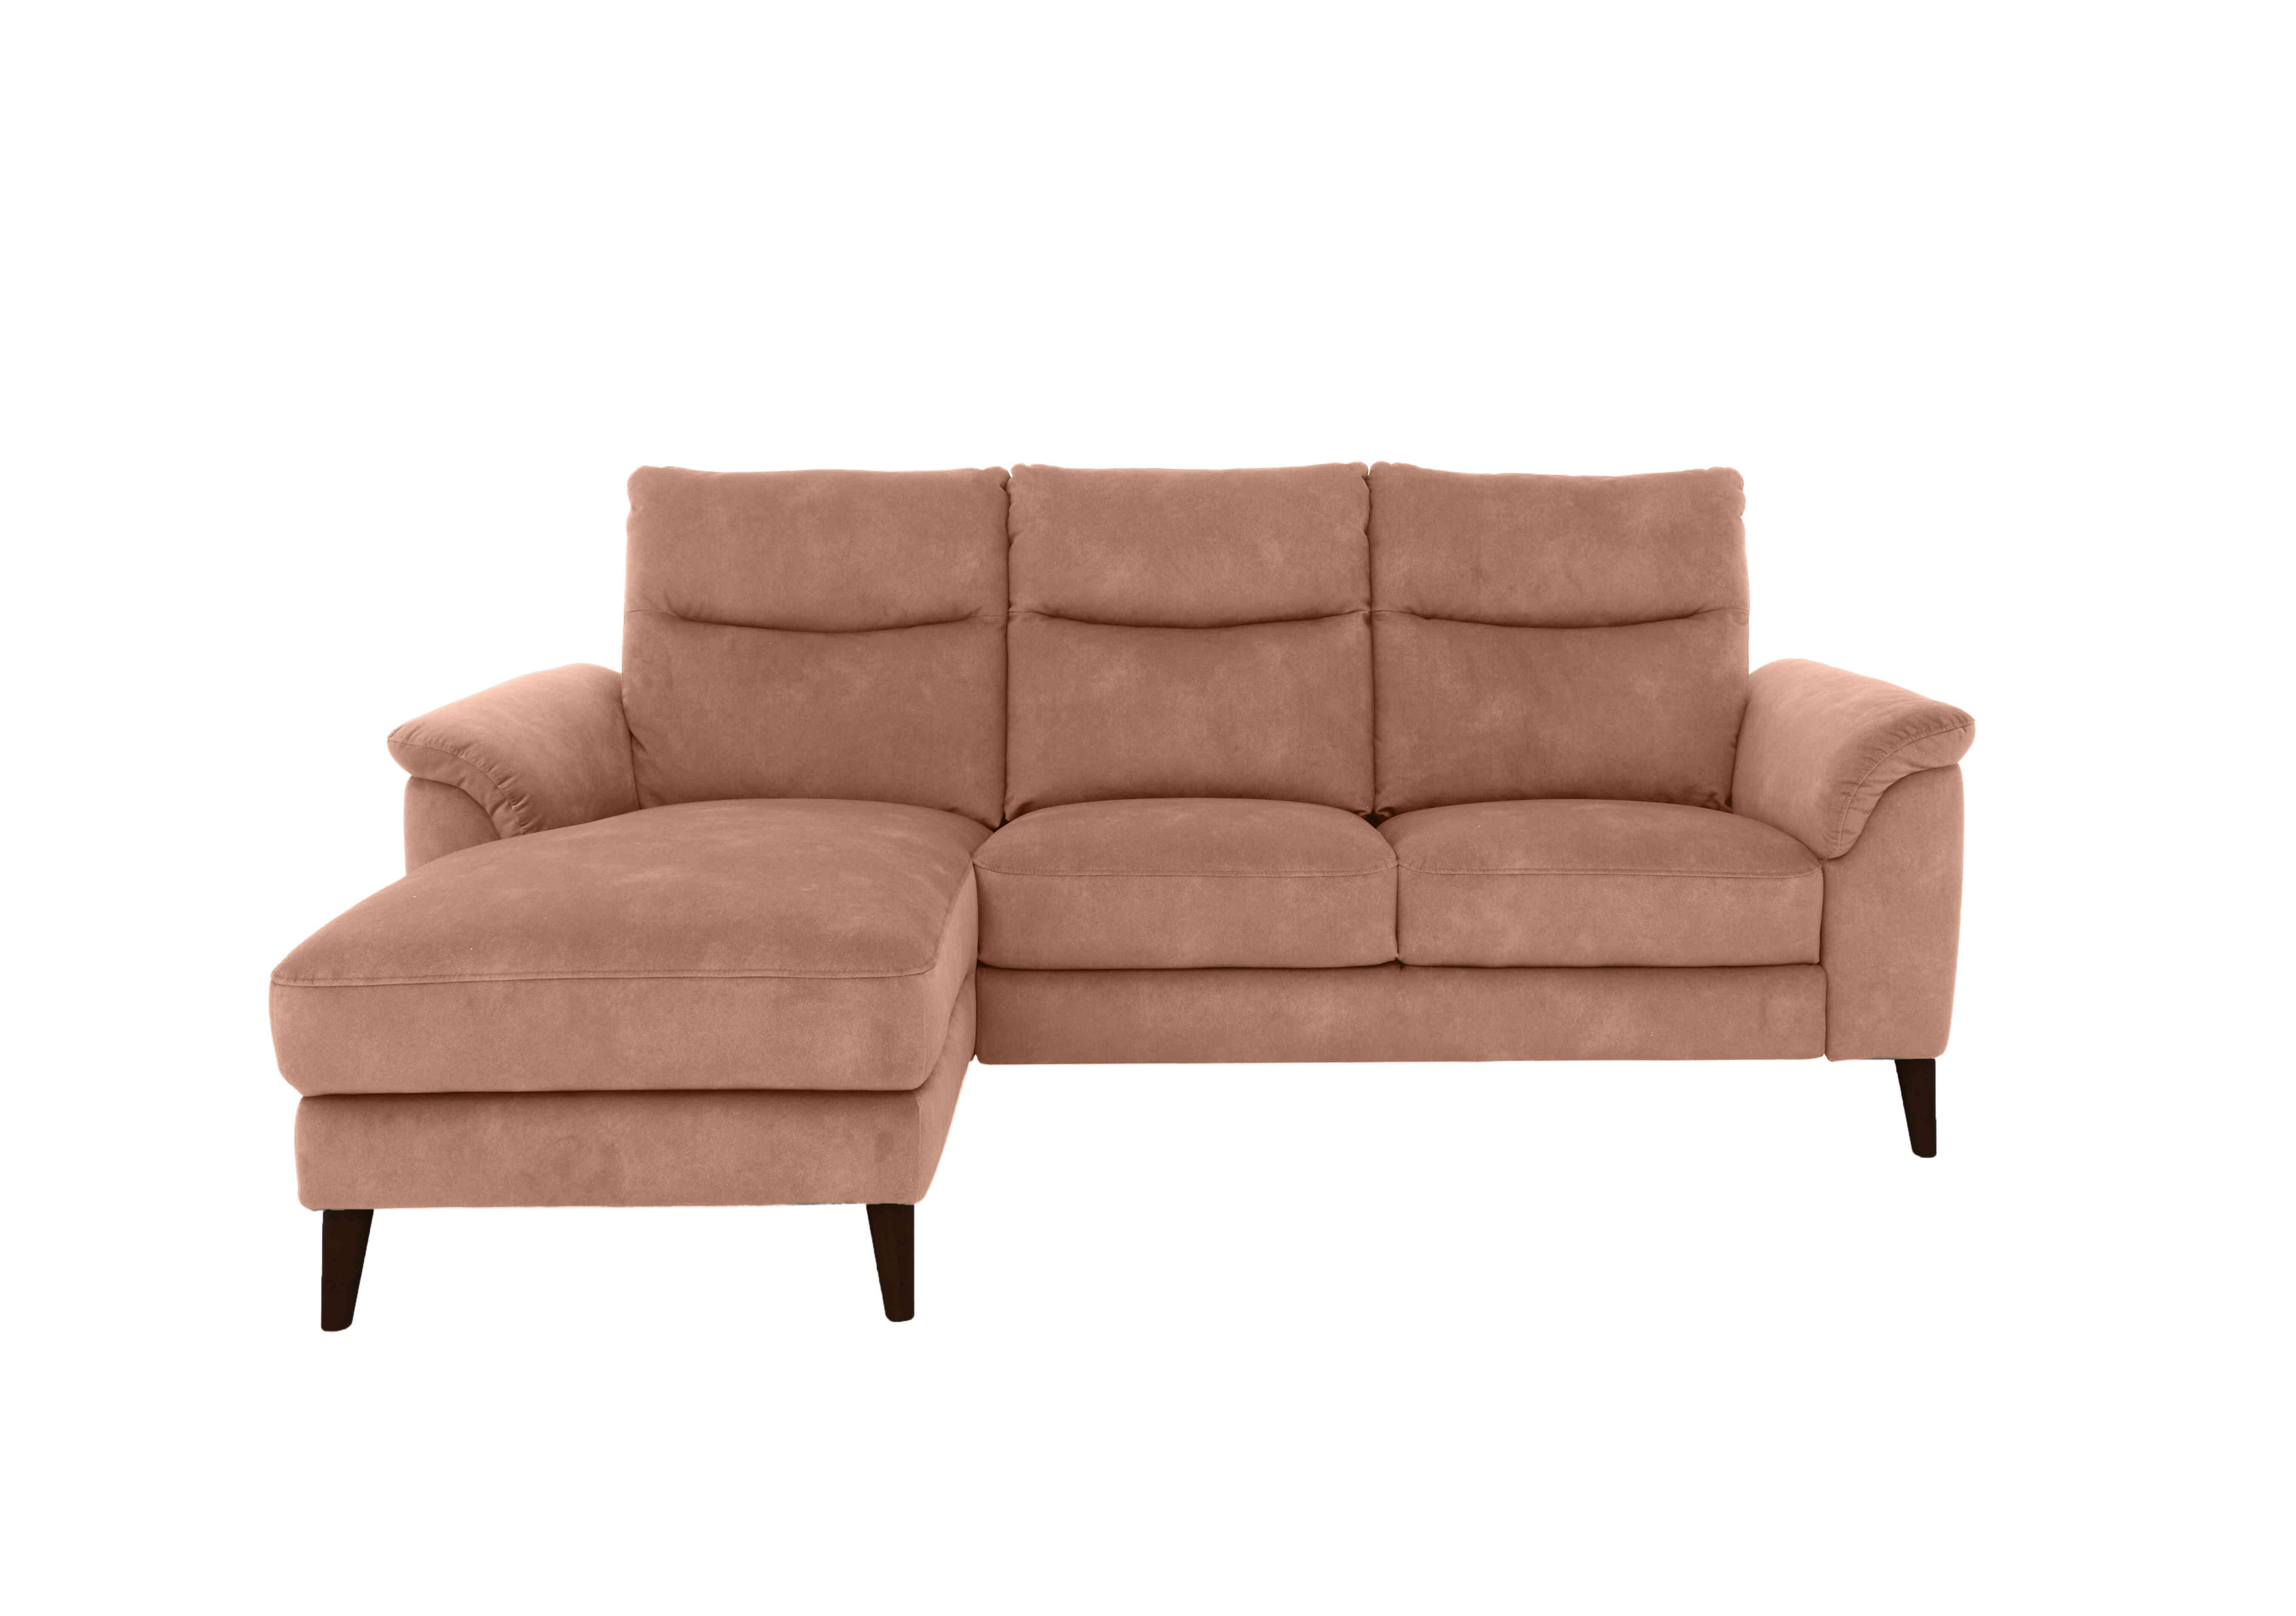 Morgan 3 Seater Fabric Sofa with Chaise End in Sand Dexter 07 43507 on Furniture Village